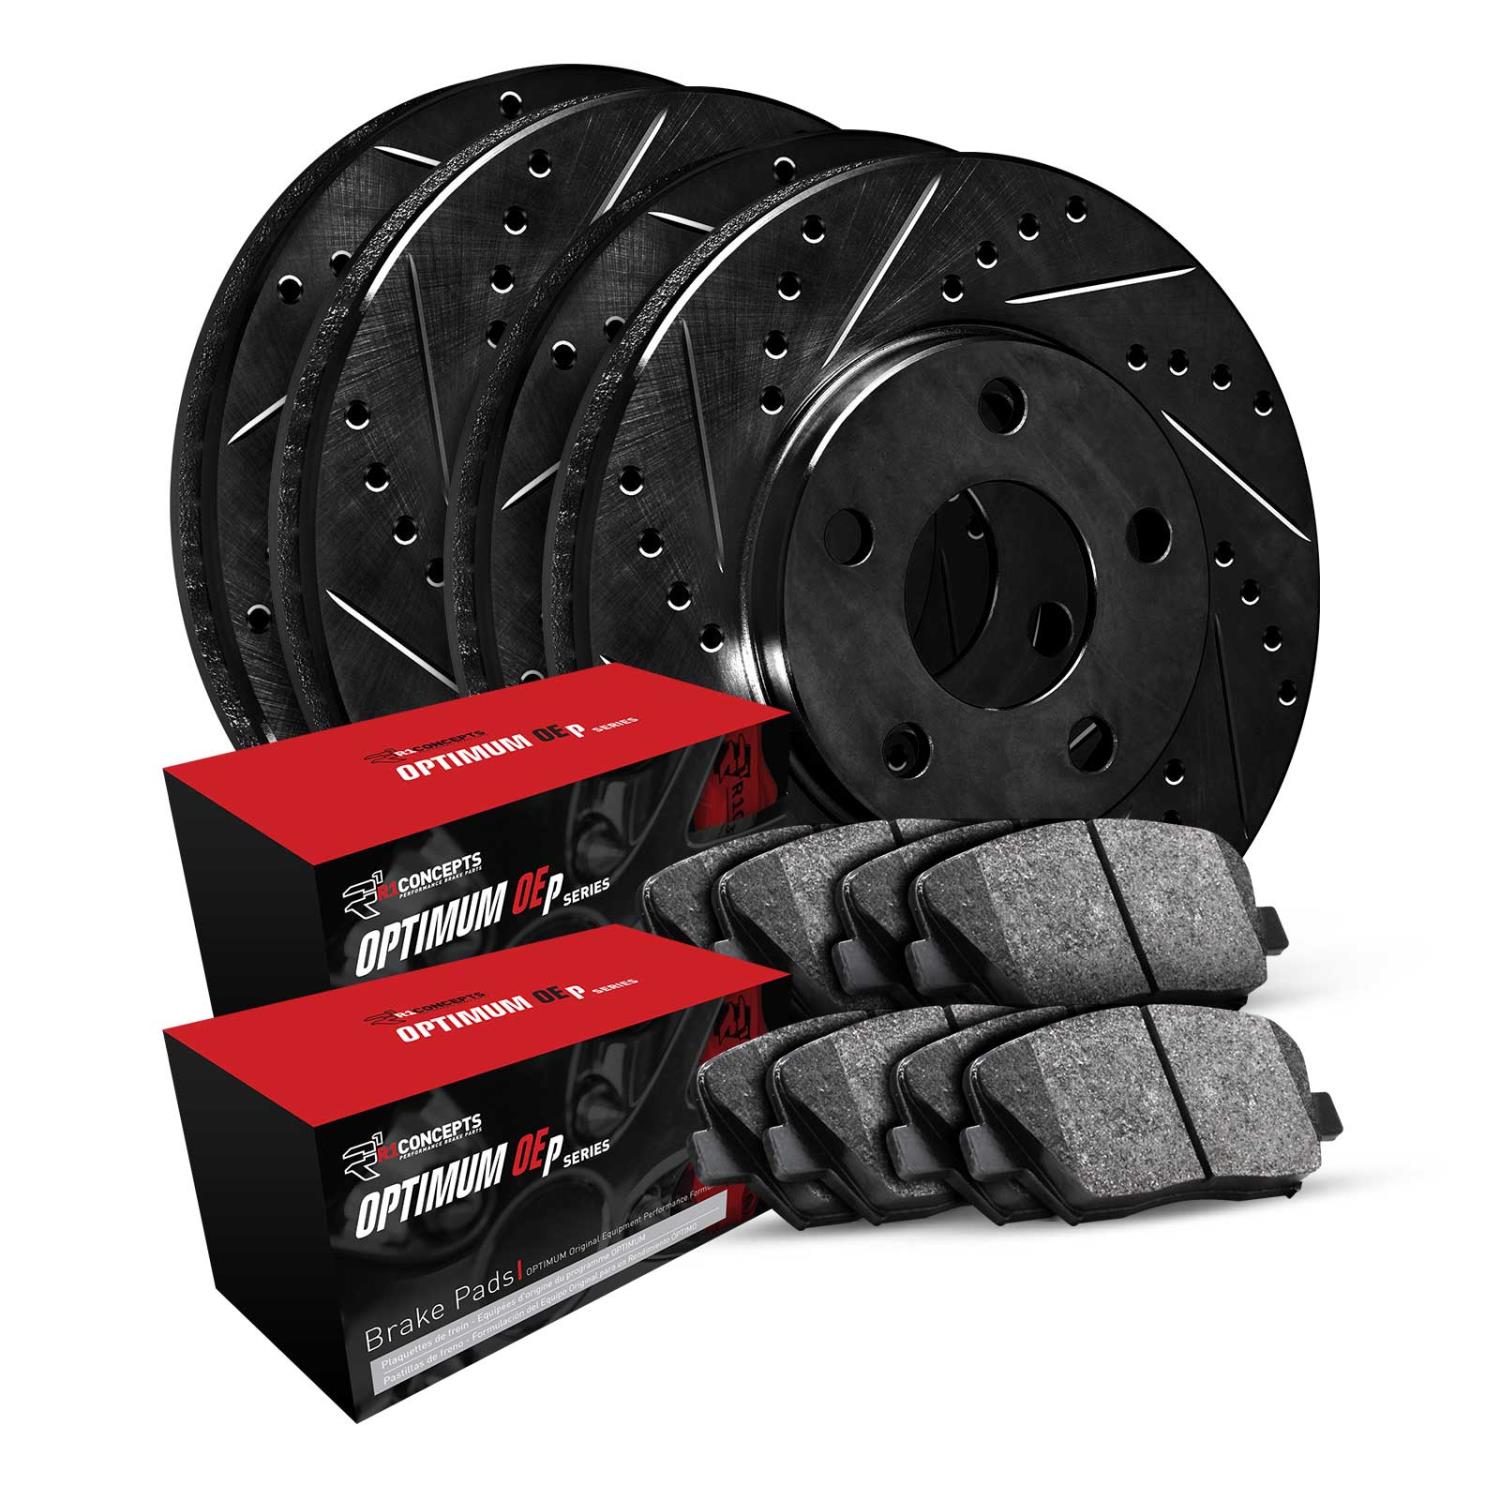 E-Line Drilled & Slotted Black Brake Rotor & Drum Set w/Optimum OE Pads & Shoes, 1995-1996 Fits Multiple Makes/Models